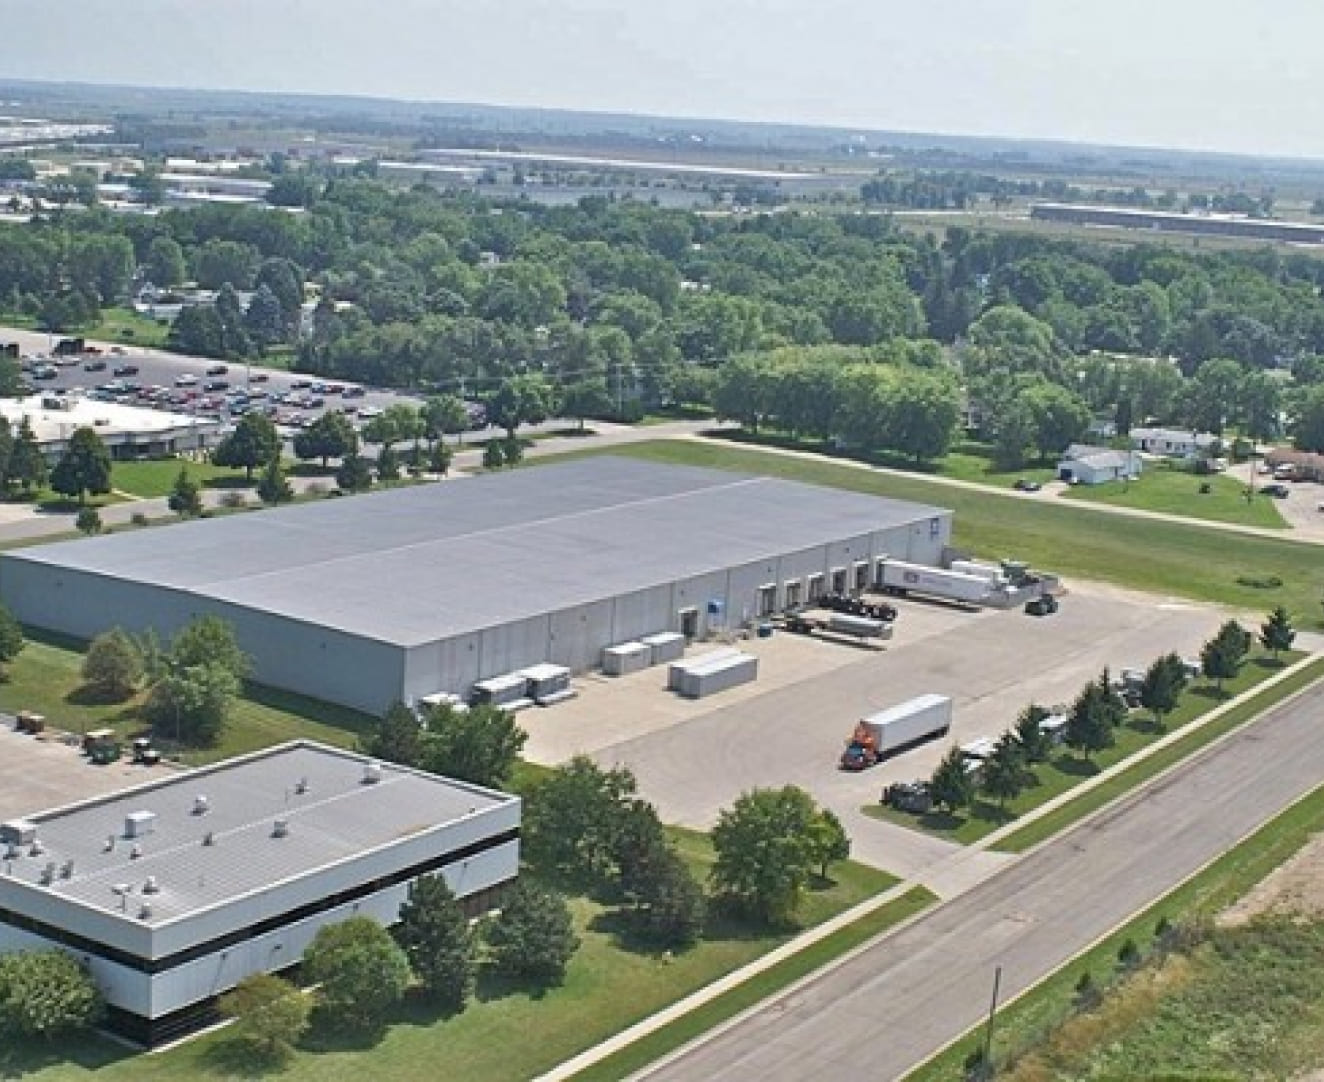 An aerial view of the warehouse at 1855 S. Jackson Street in Janesville, WI.